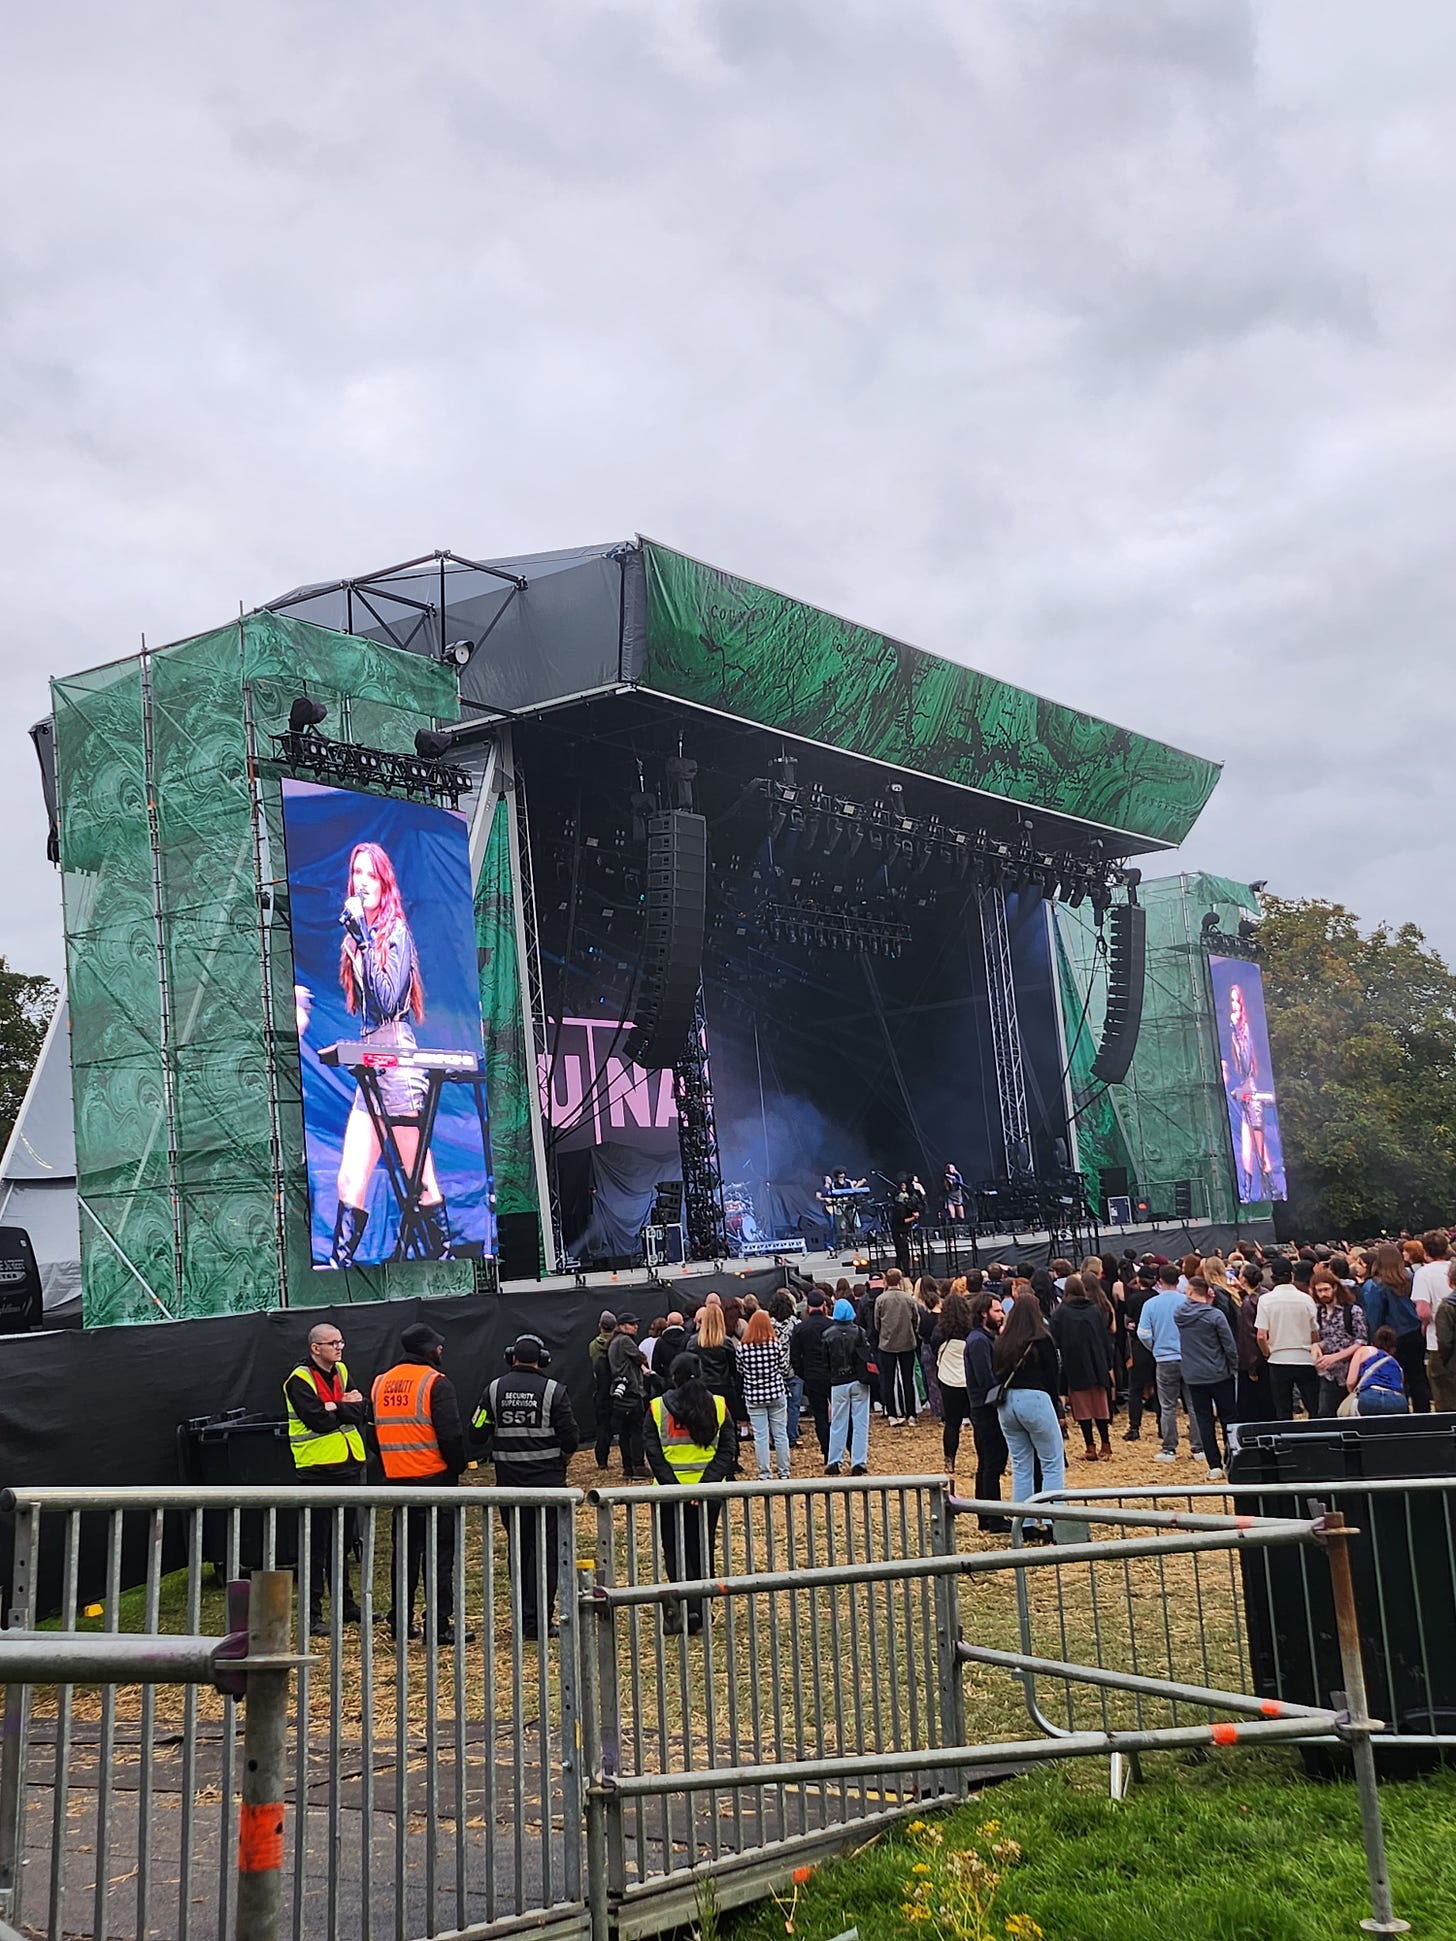 Situated just outside the Gold Circle, the accessible viewing platform has an almost VIP of the main stage, which shows the band MUNA is full performance mode